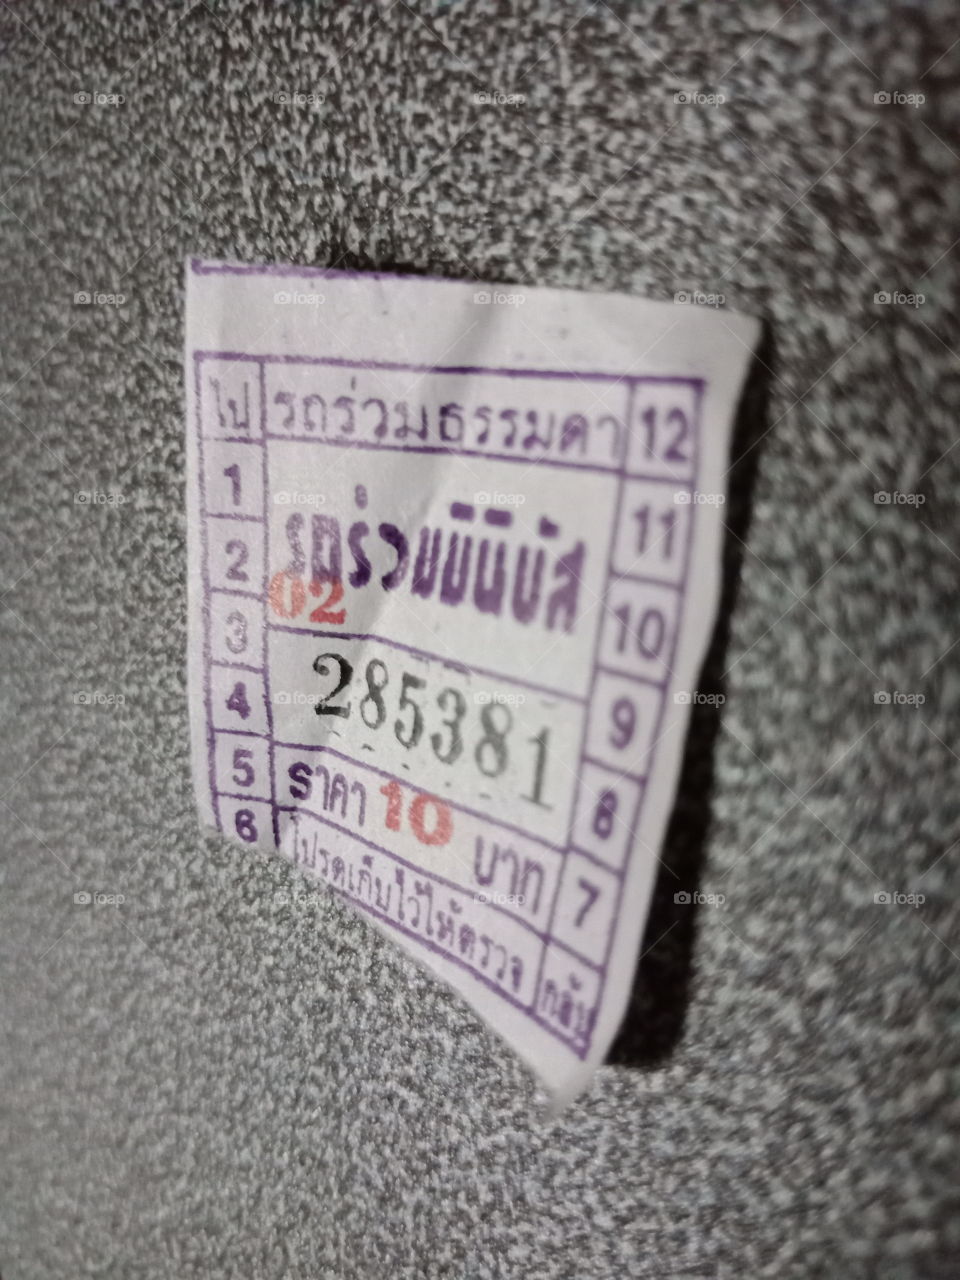 The bus ticket of Thailand